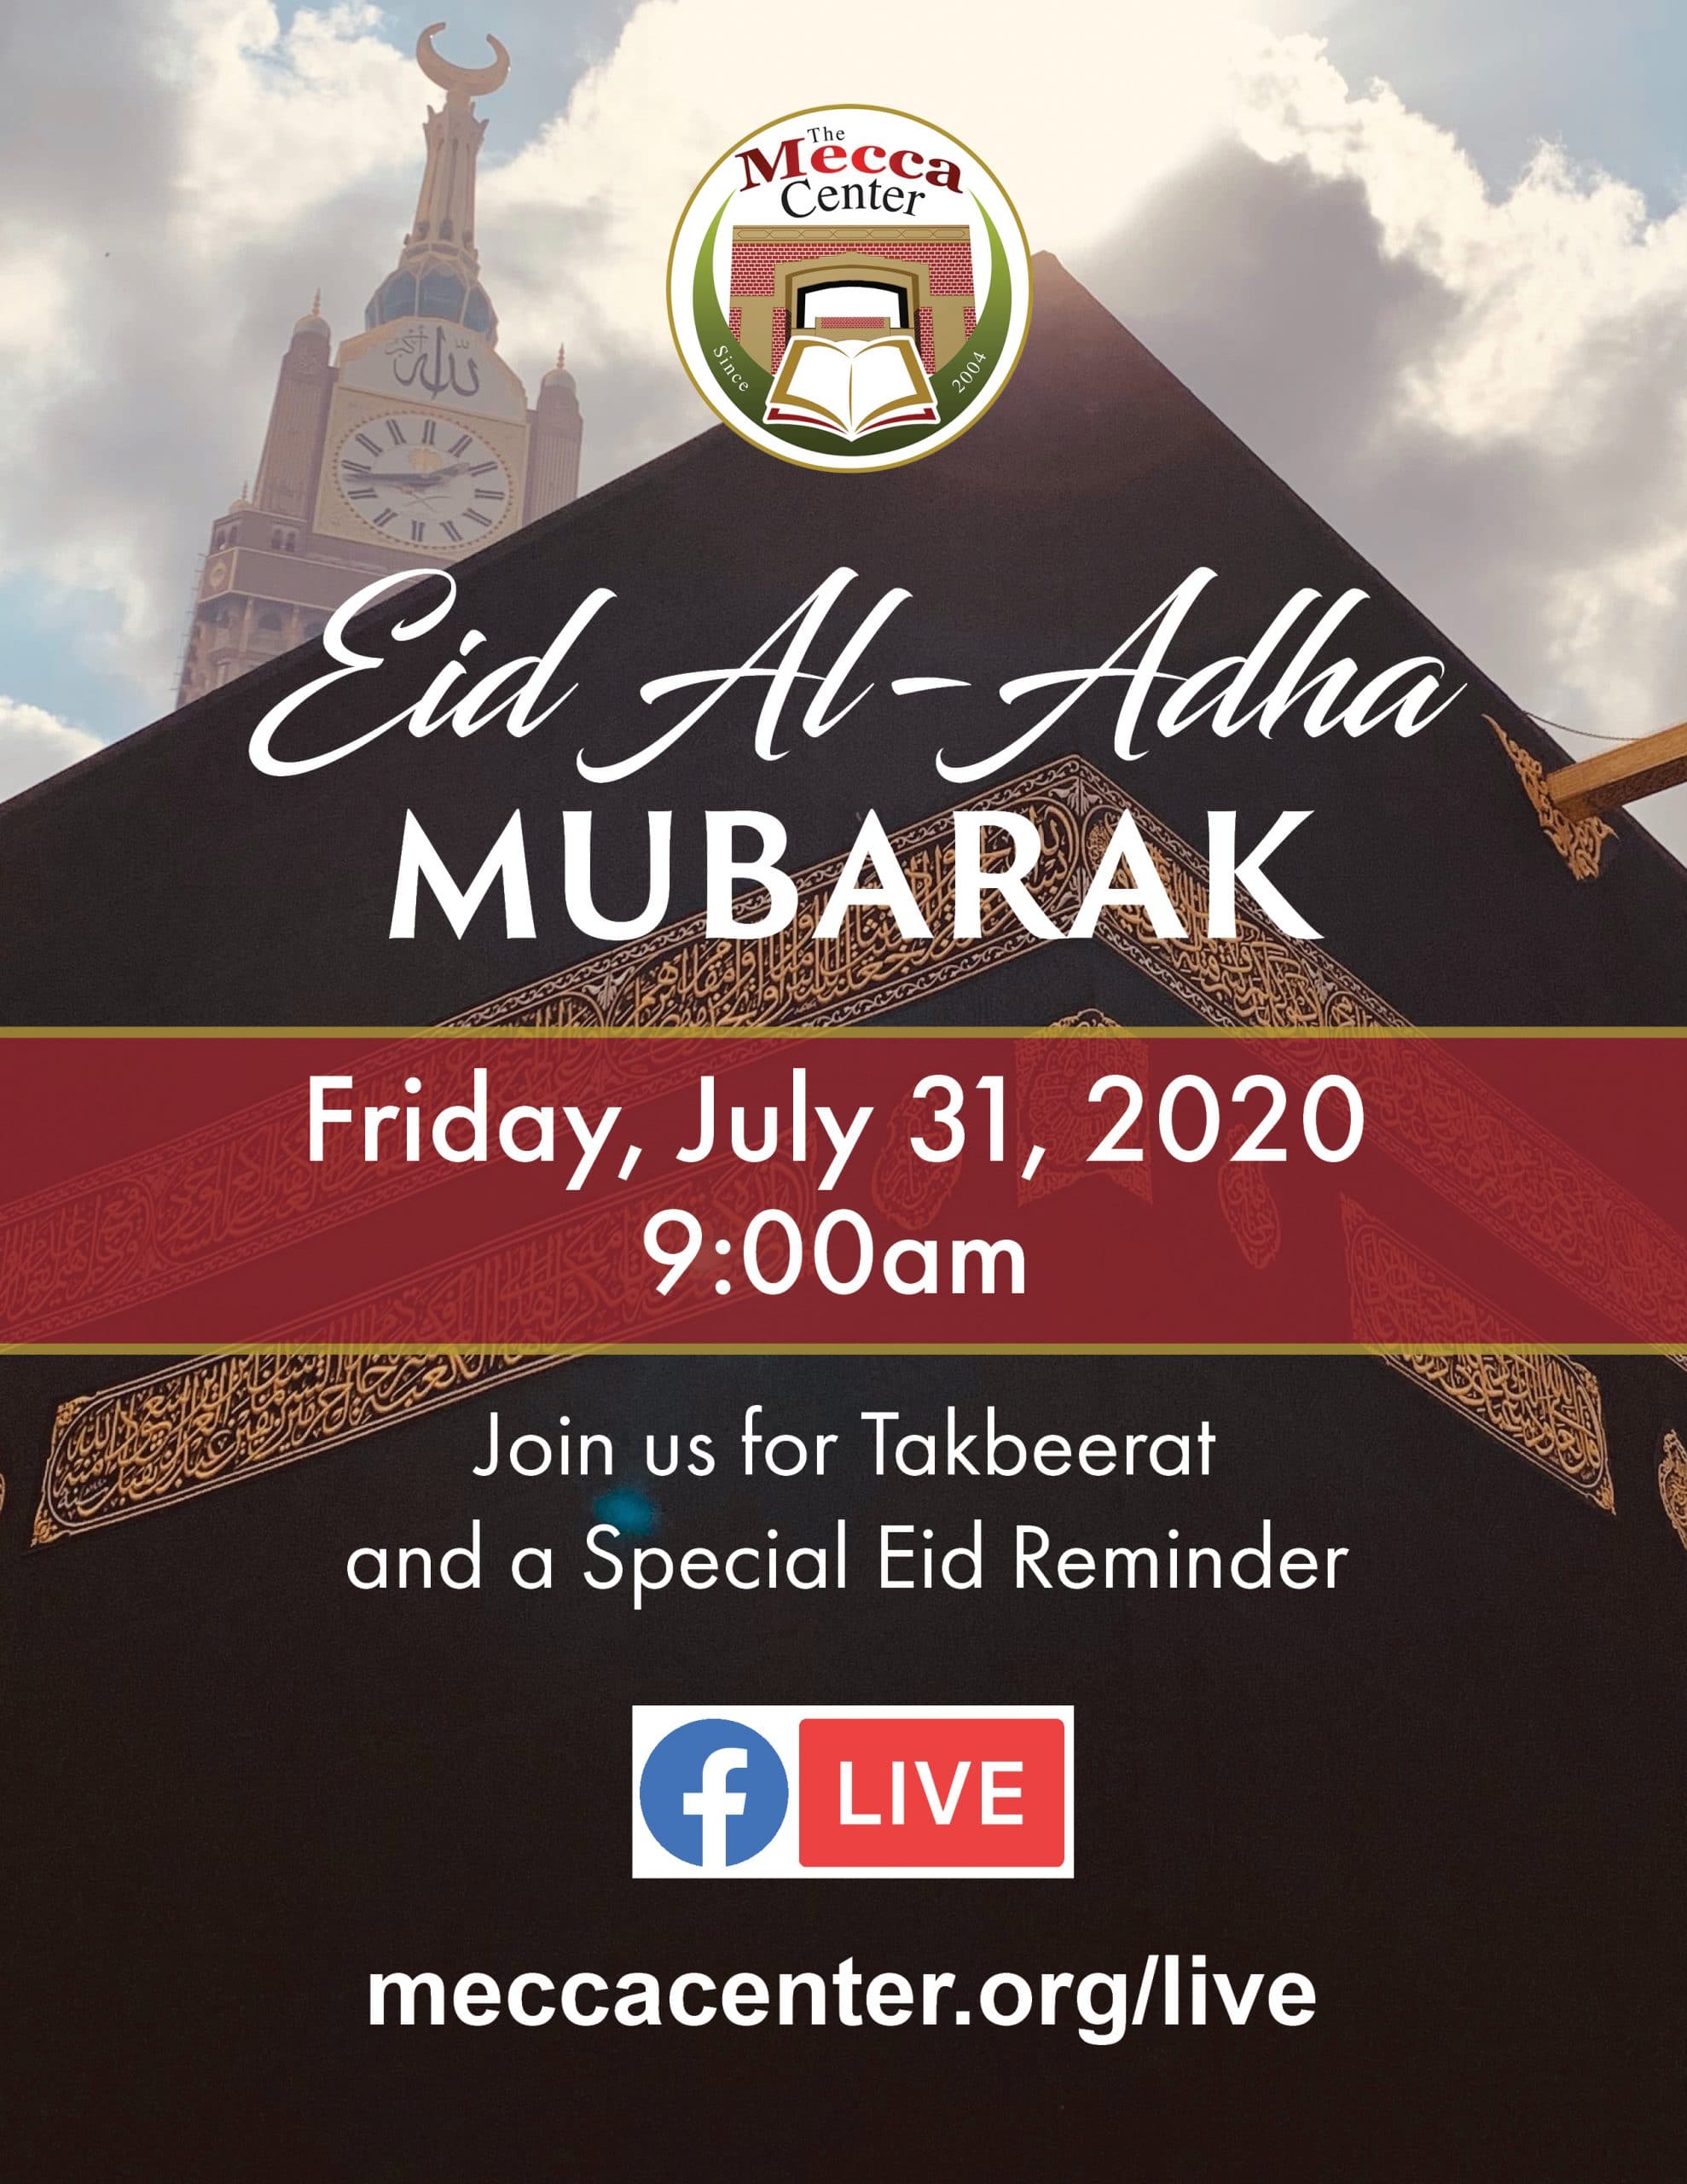 Eid Al-Adha with The Mecca Center, July 31 - The Mecca Center